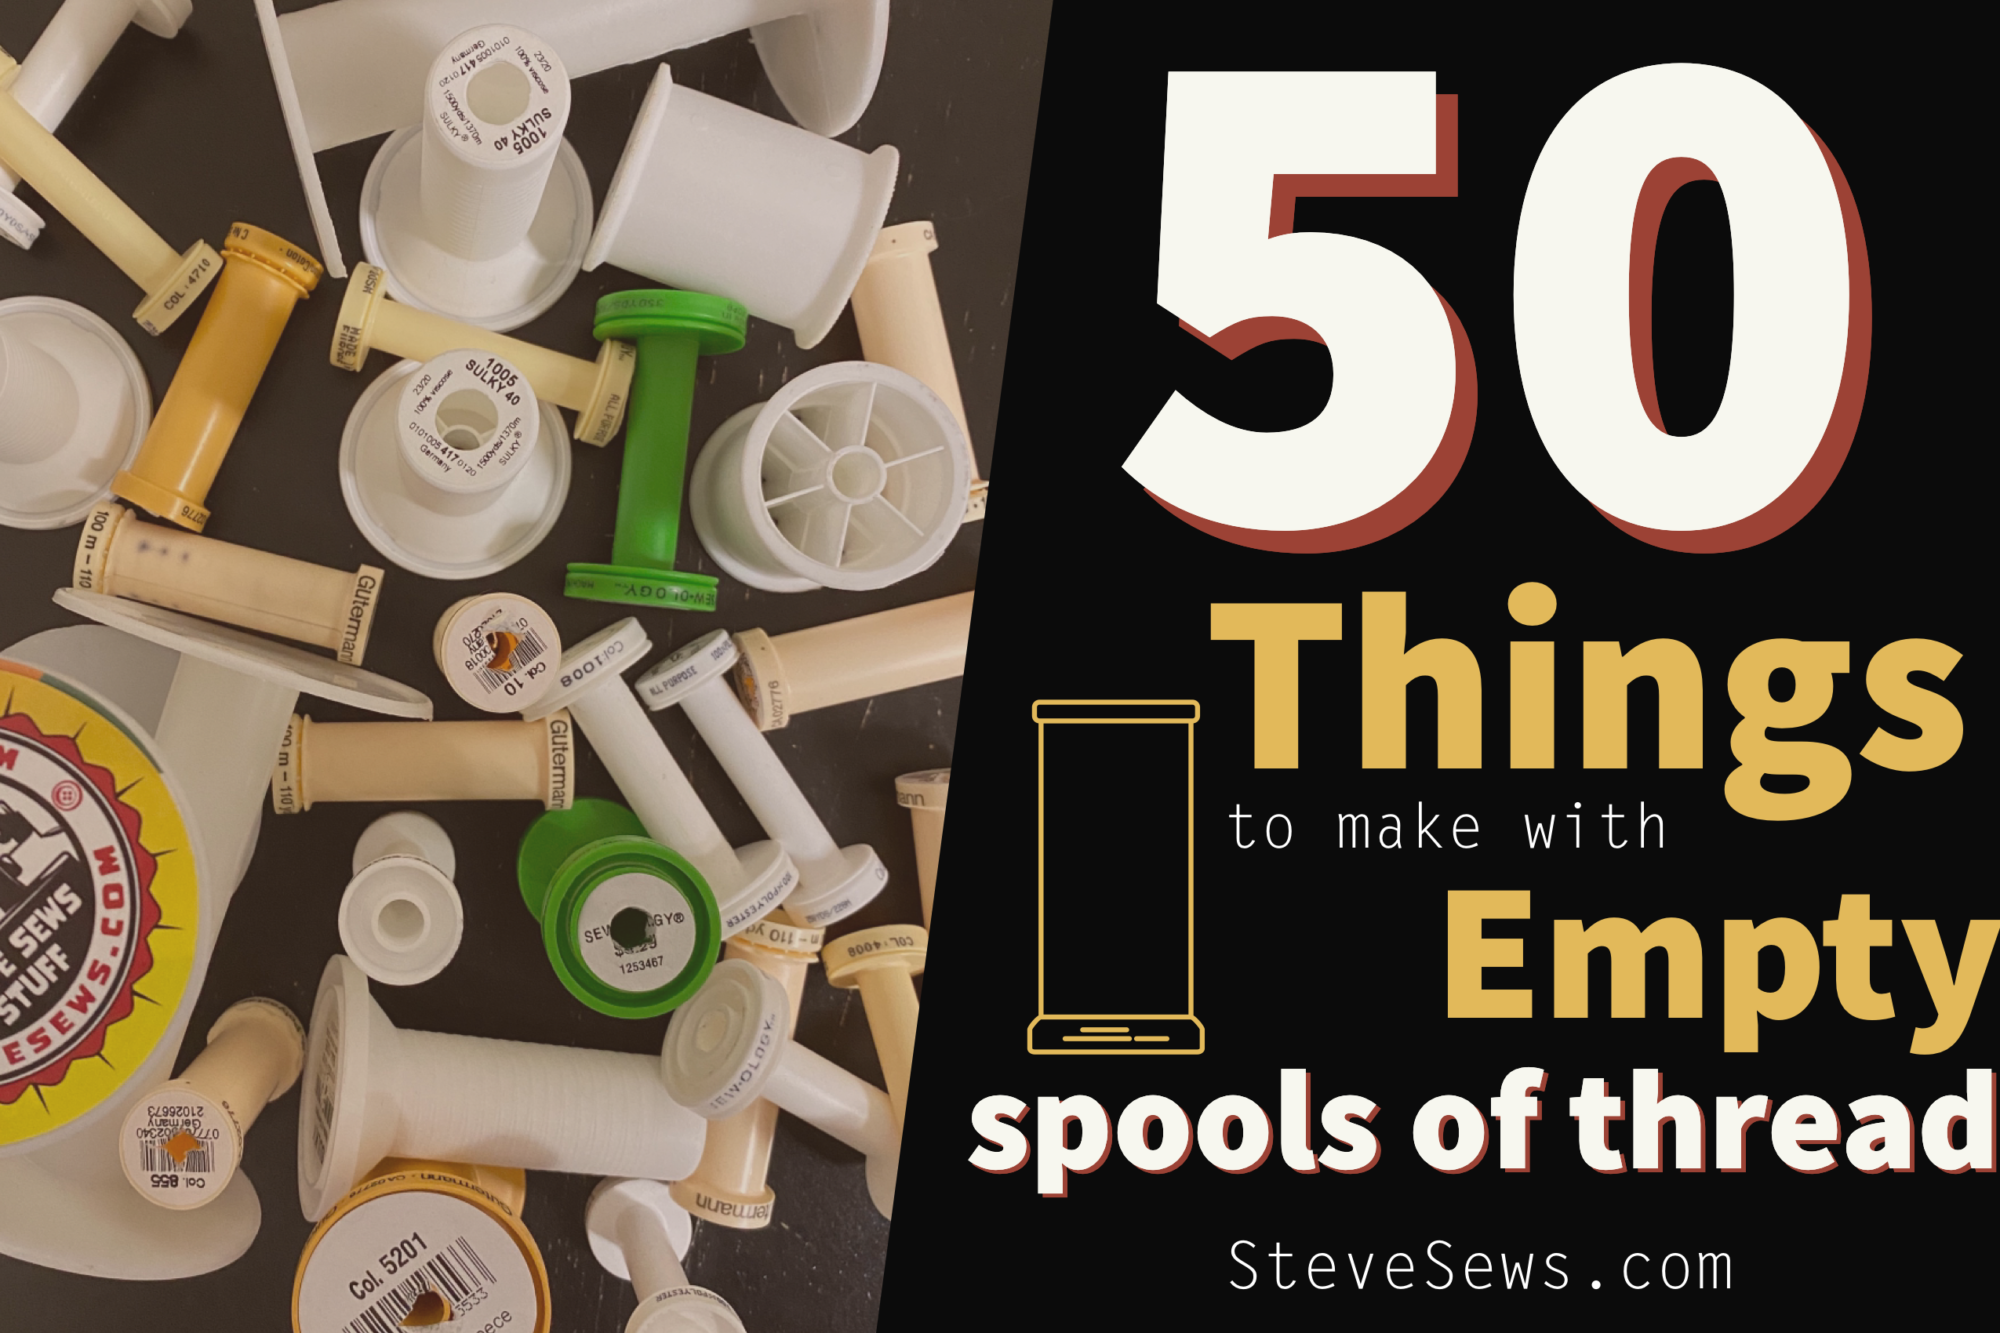 35 Ways To Reuse Thread Spools, Green Eco Services